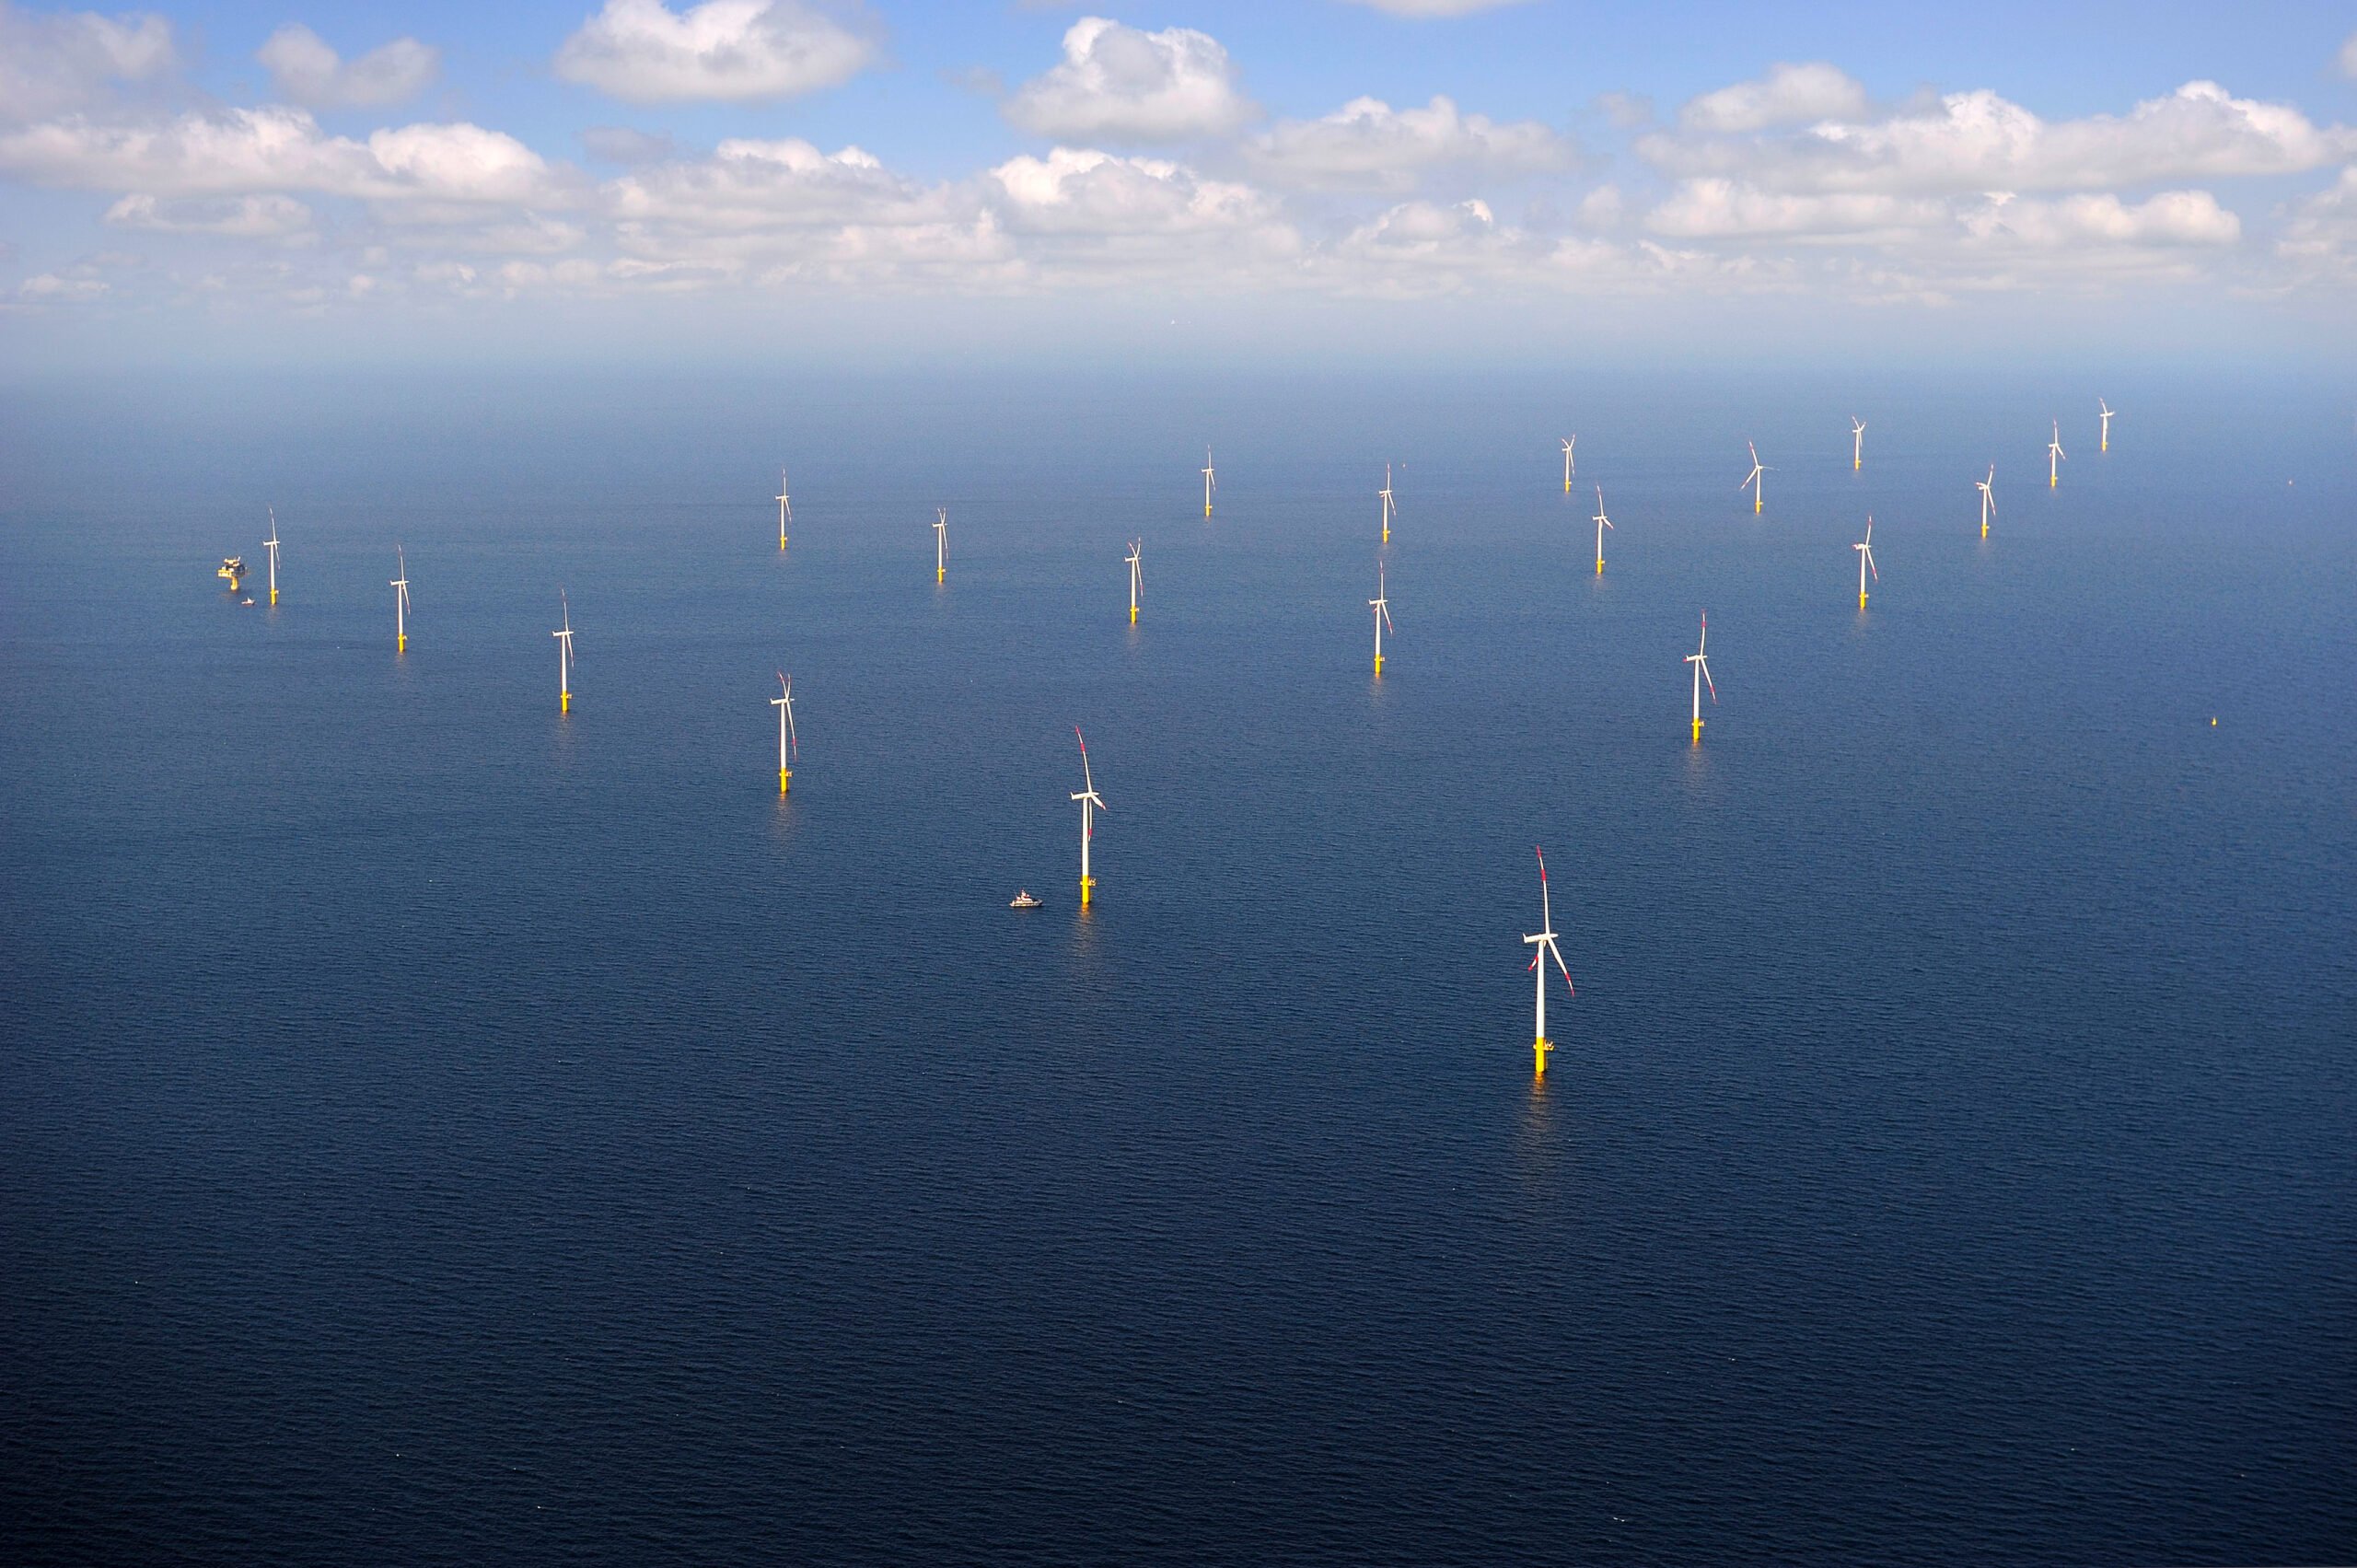 Offshore wind in Poland: a potential output of 28 gigawatts